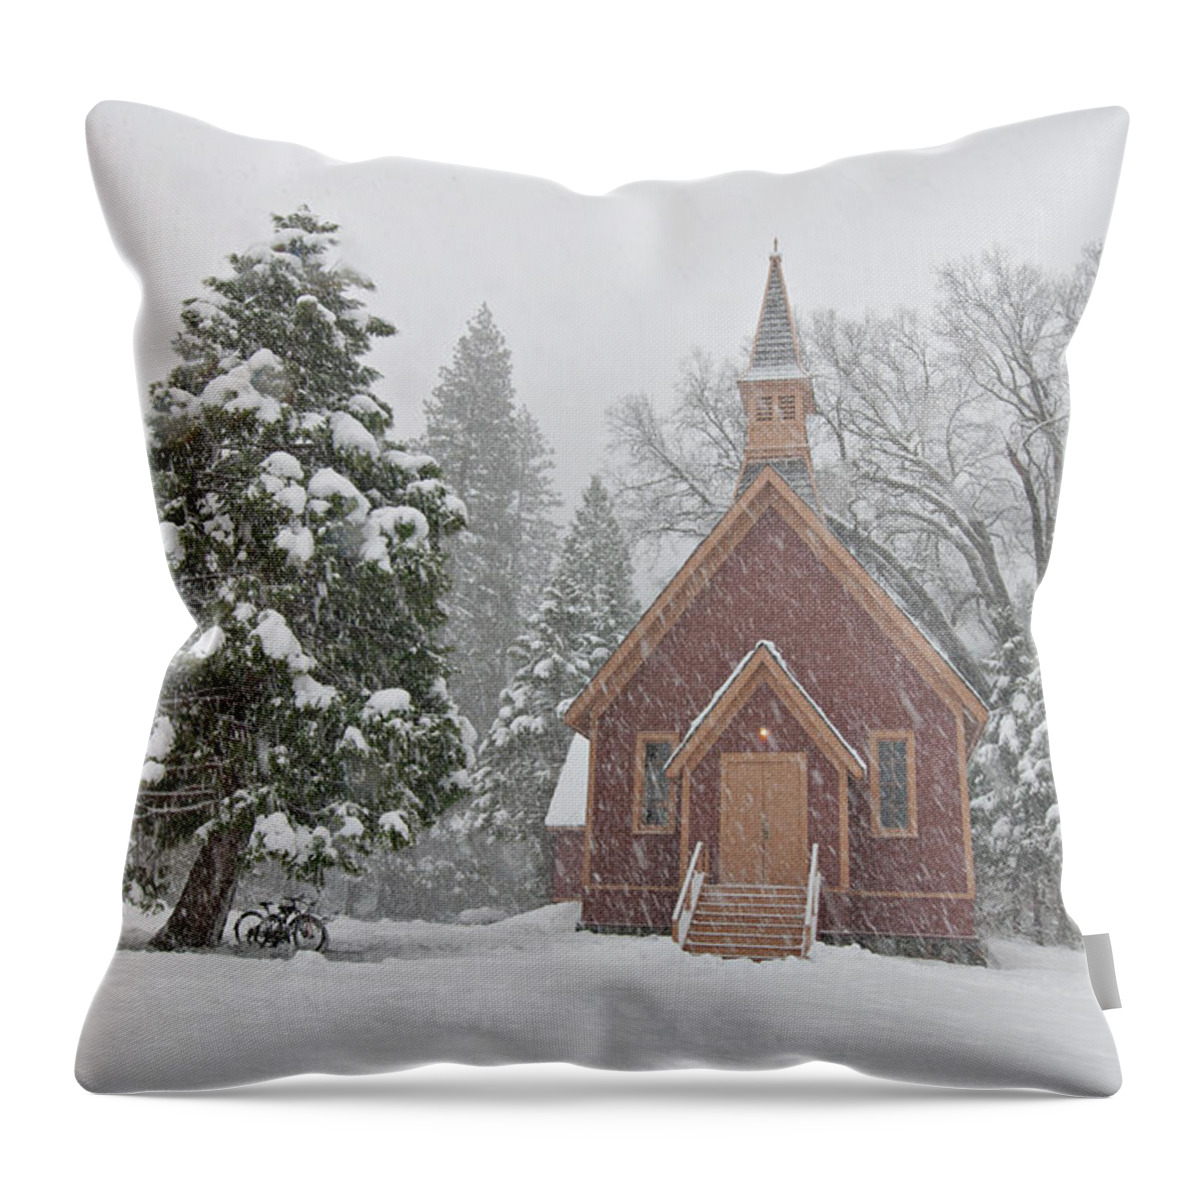 Tranquility Throw Pillow featuring the photograph Chapel At Yosemite by Sapna Reddy Photography